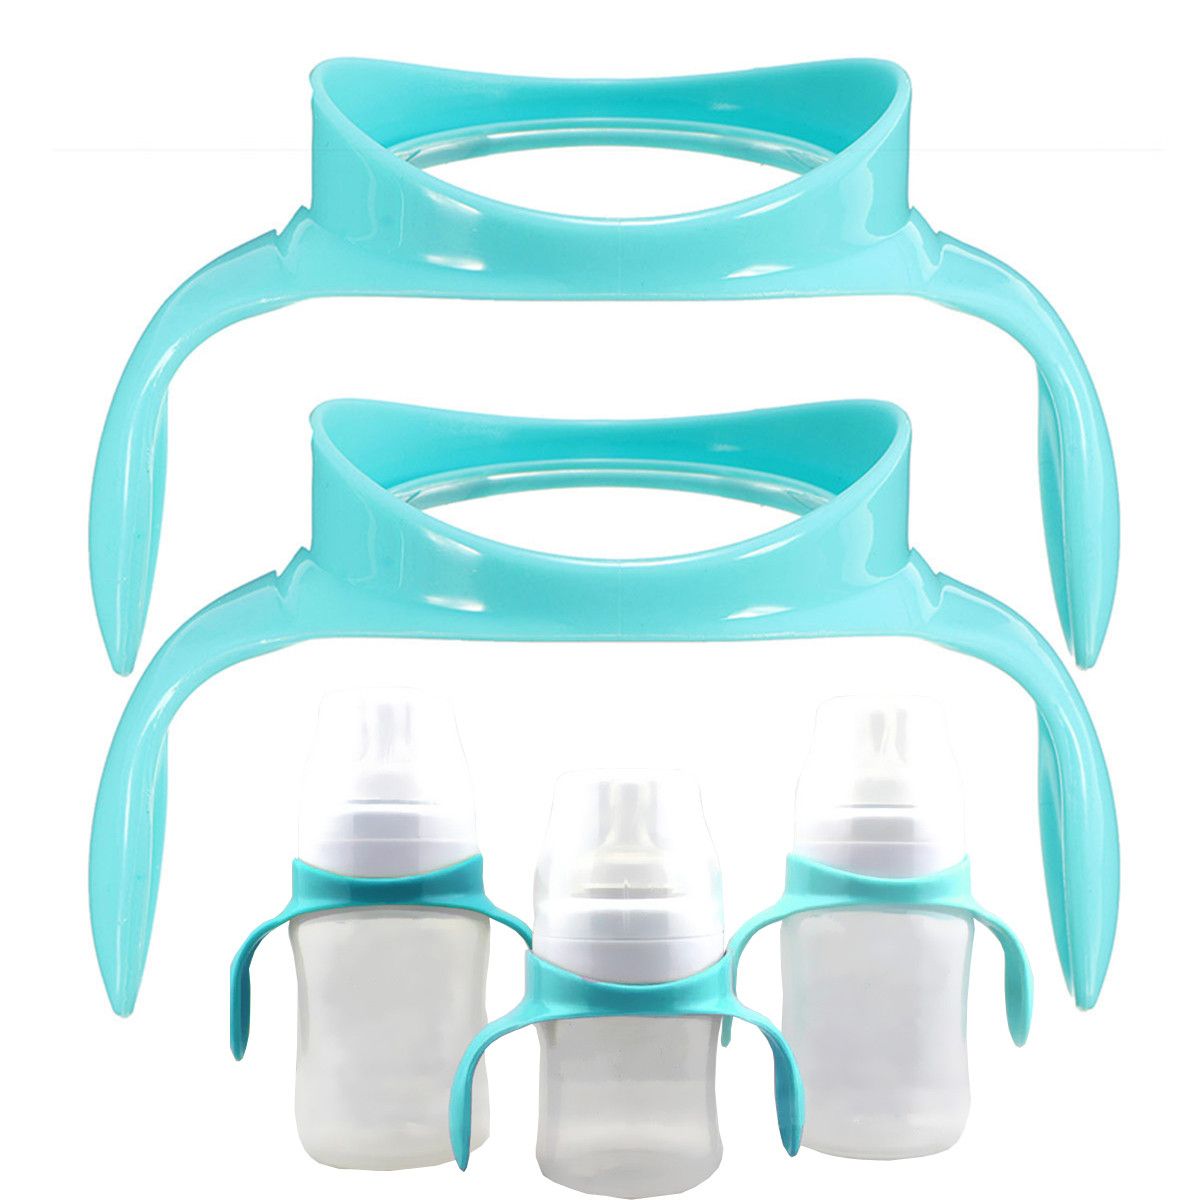 2PcsSet-Baby-Bottles-Handles-for-Avent-Wide-Neck-Classic-Feeding-Bottle-Easy-Carry-Handles-1465493